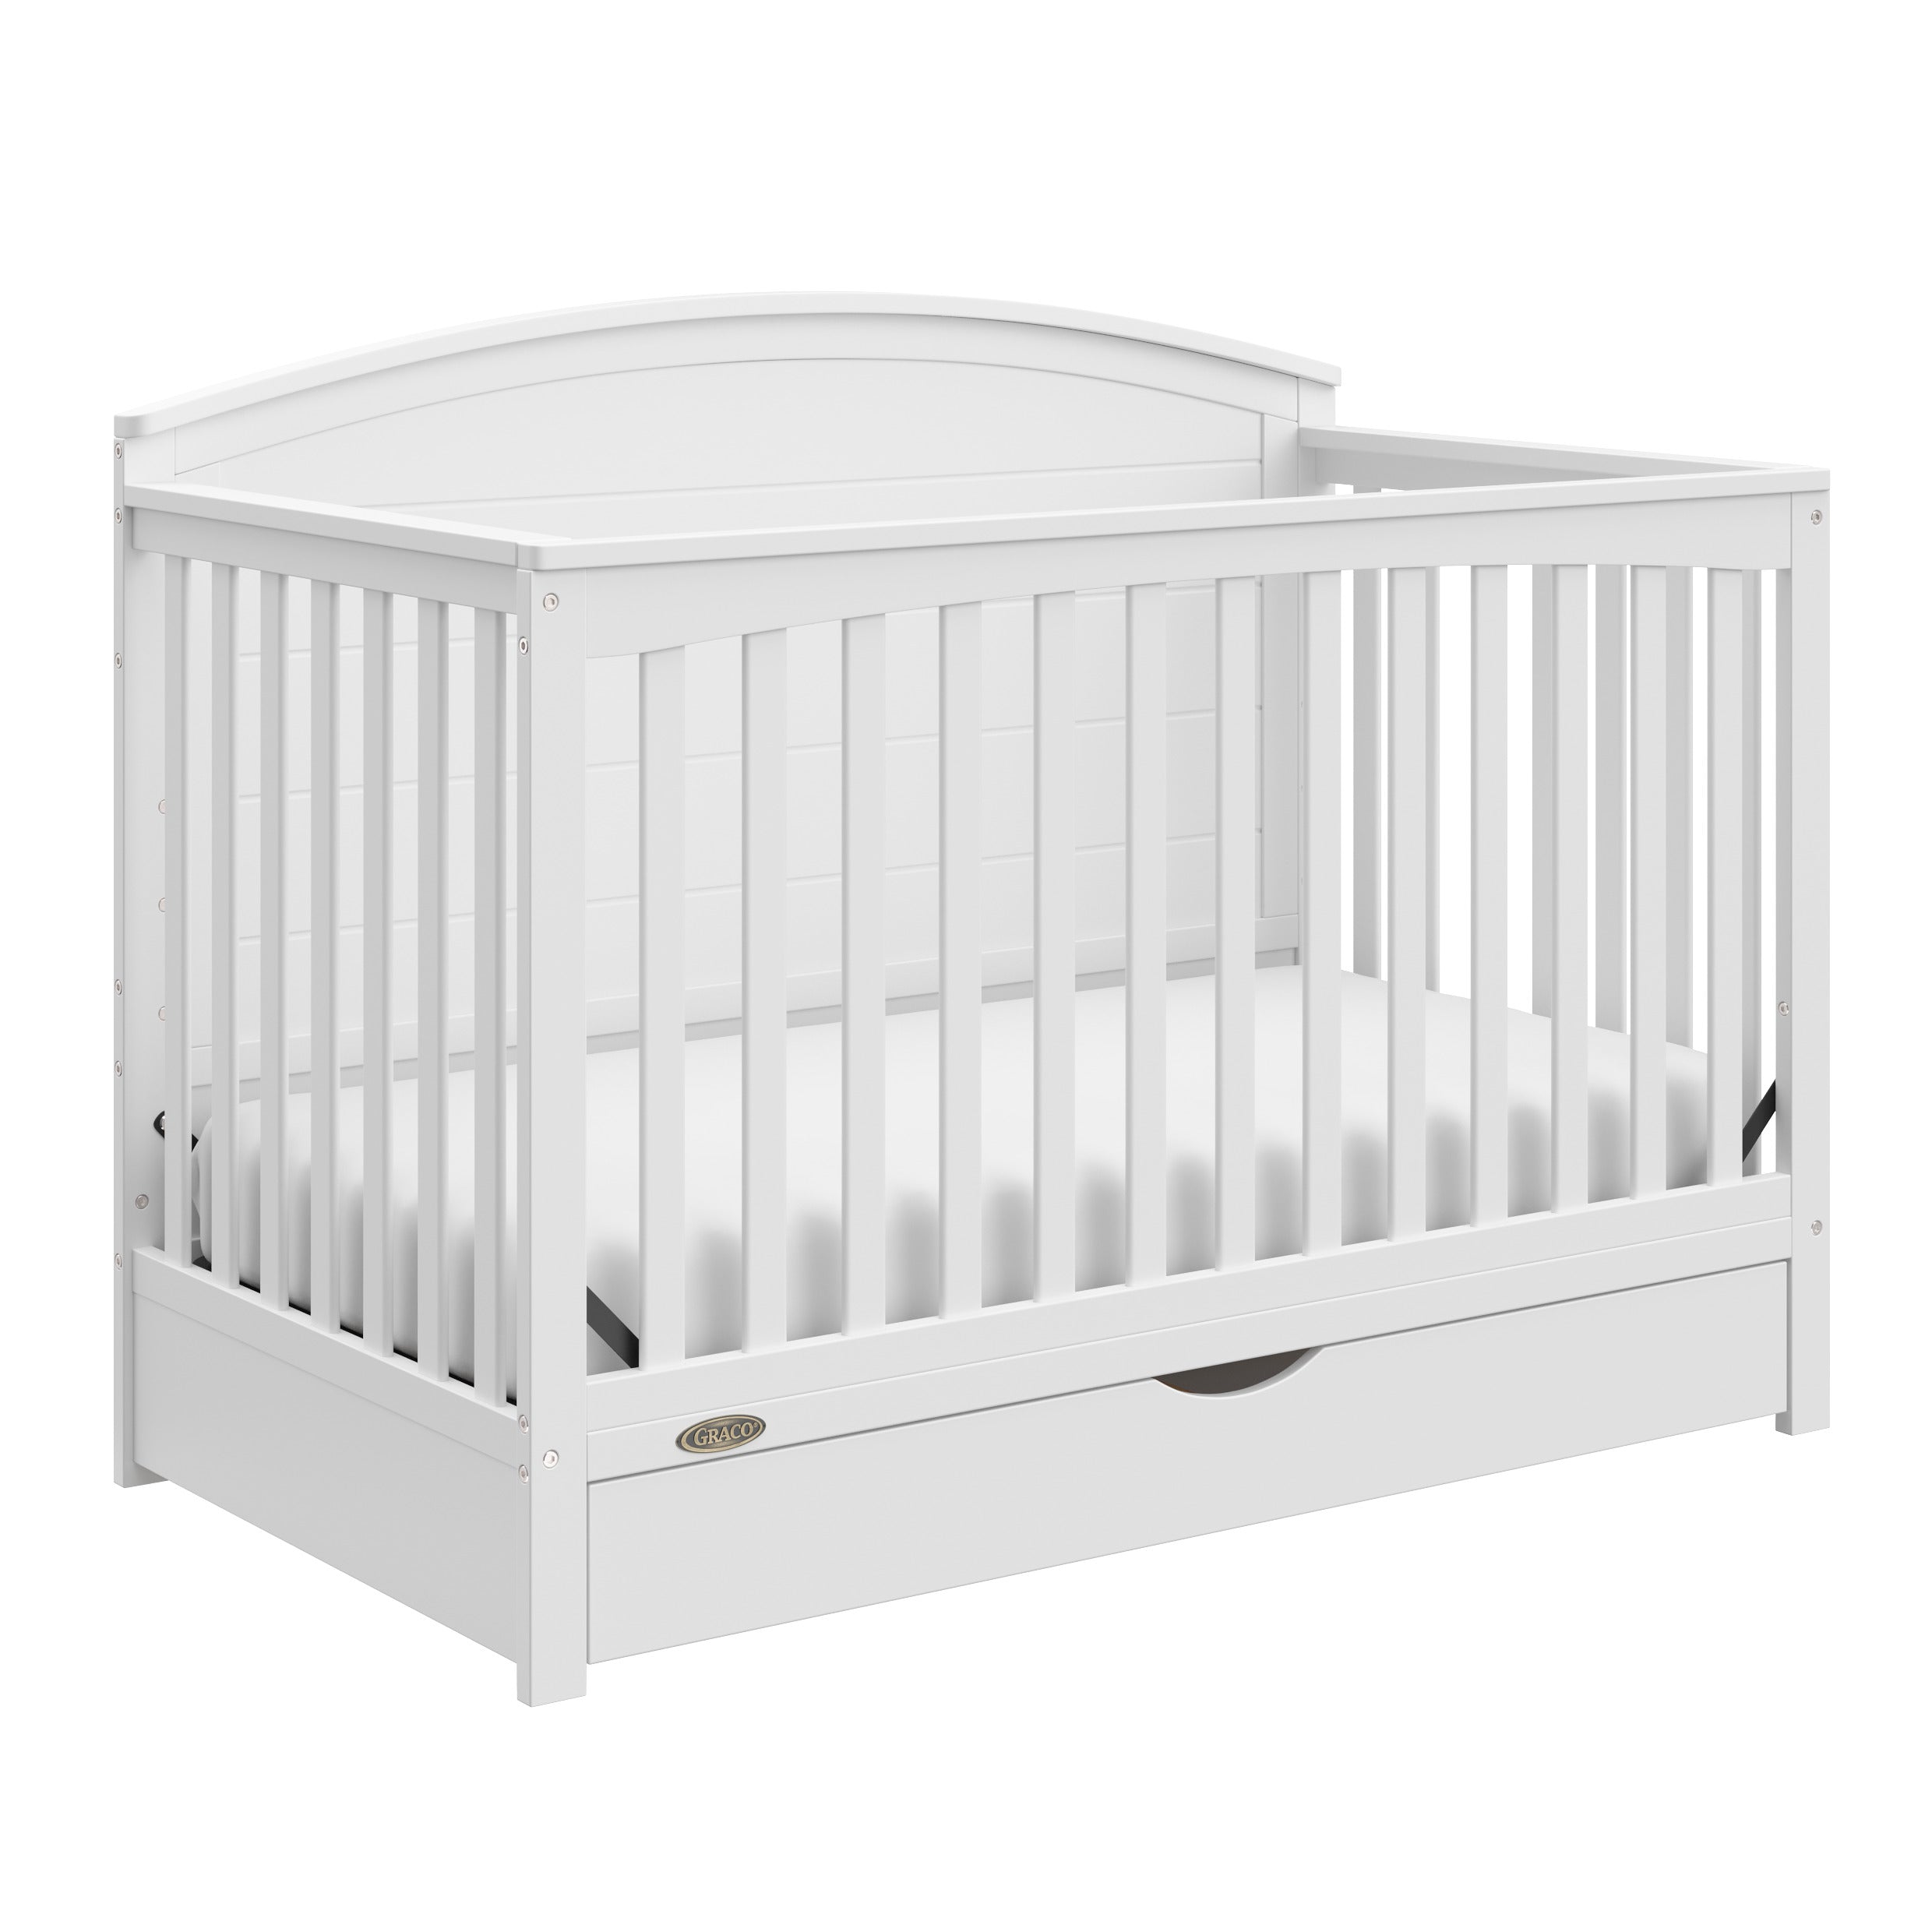 Graco® Bellwood™ 5-in-1 Convertible Crib with Drawer